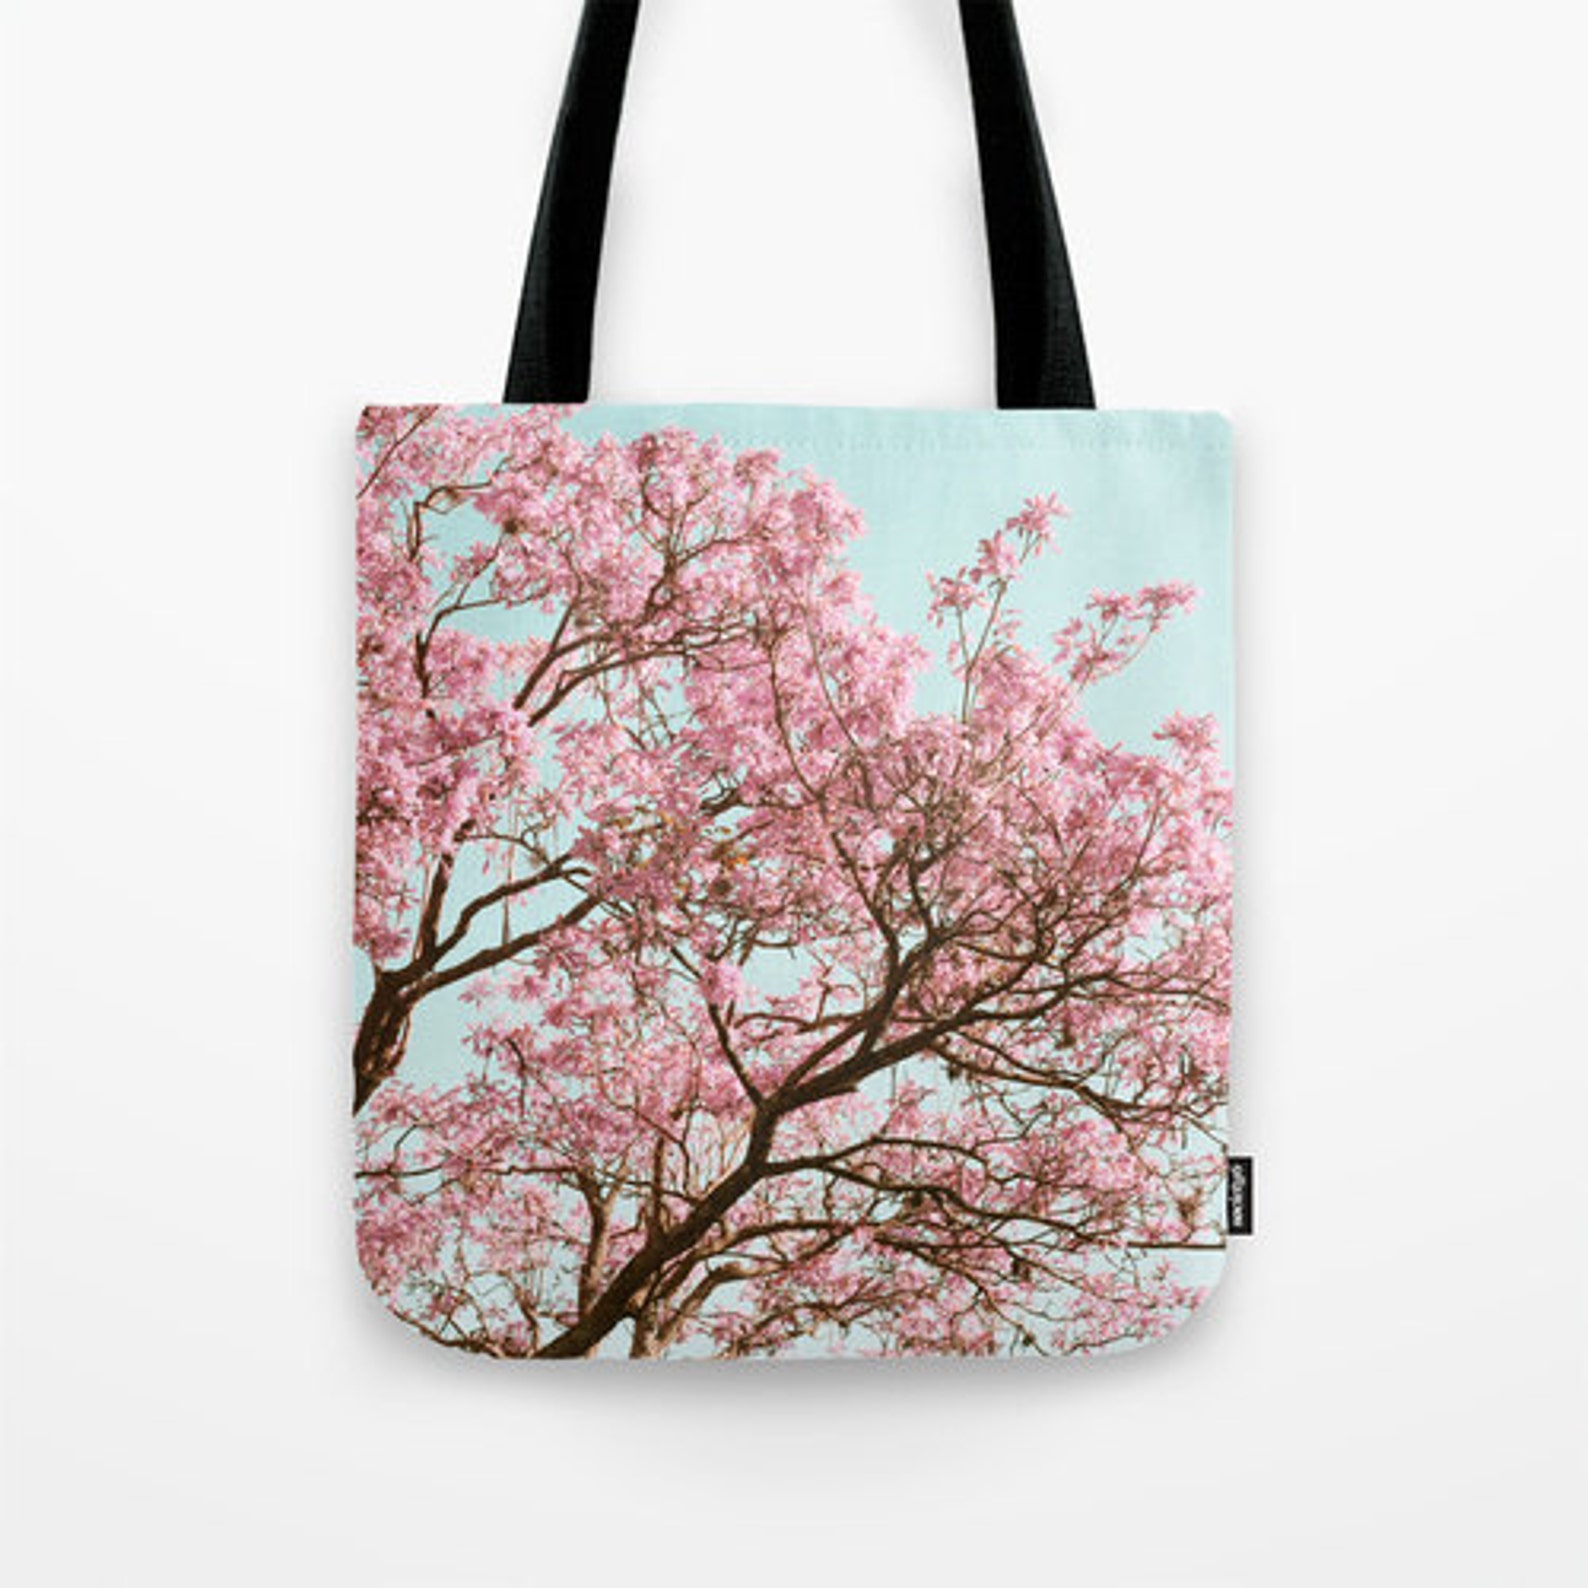 Cherry Blossom Tote Cherry Blossom Bag Mint Blue Tote Pink - Etsy